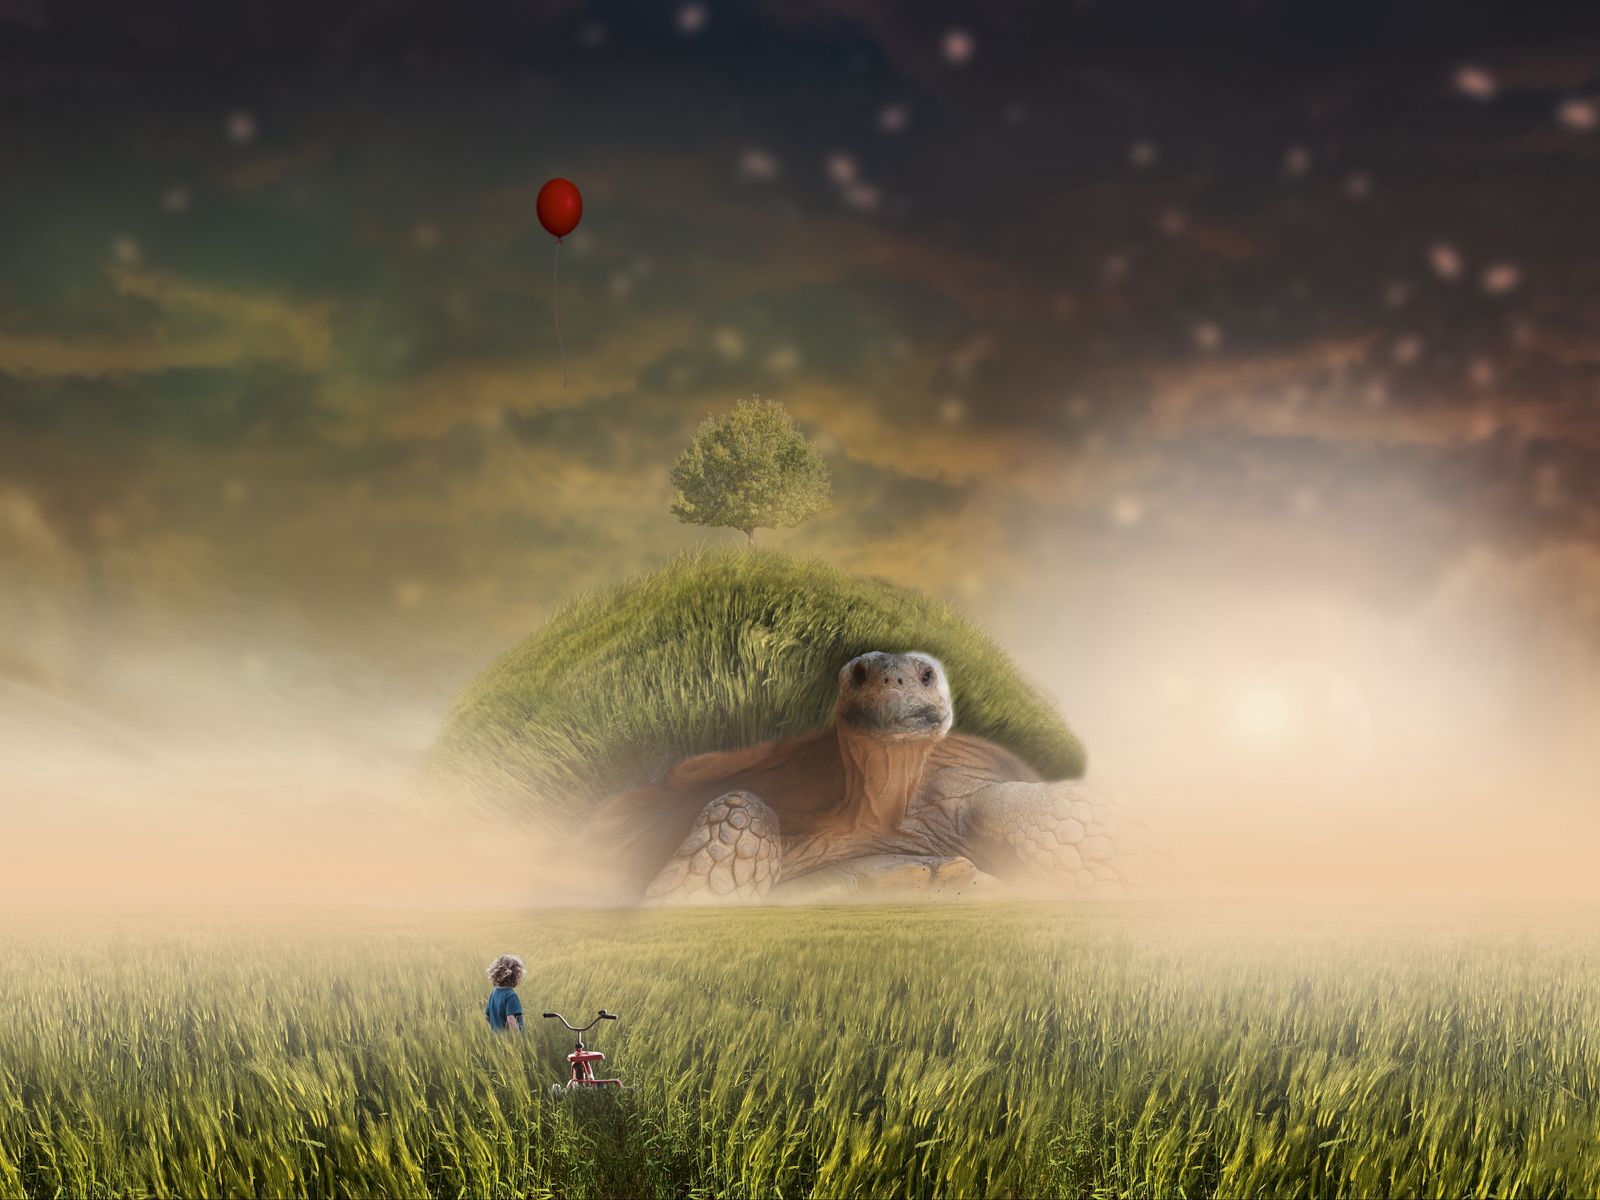 Download wallpaper 1600x1200 turtle, photoshop, child, bicycle, field,  grass standard 4:3 hd background